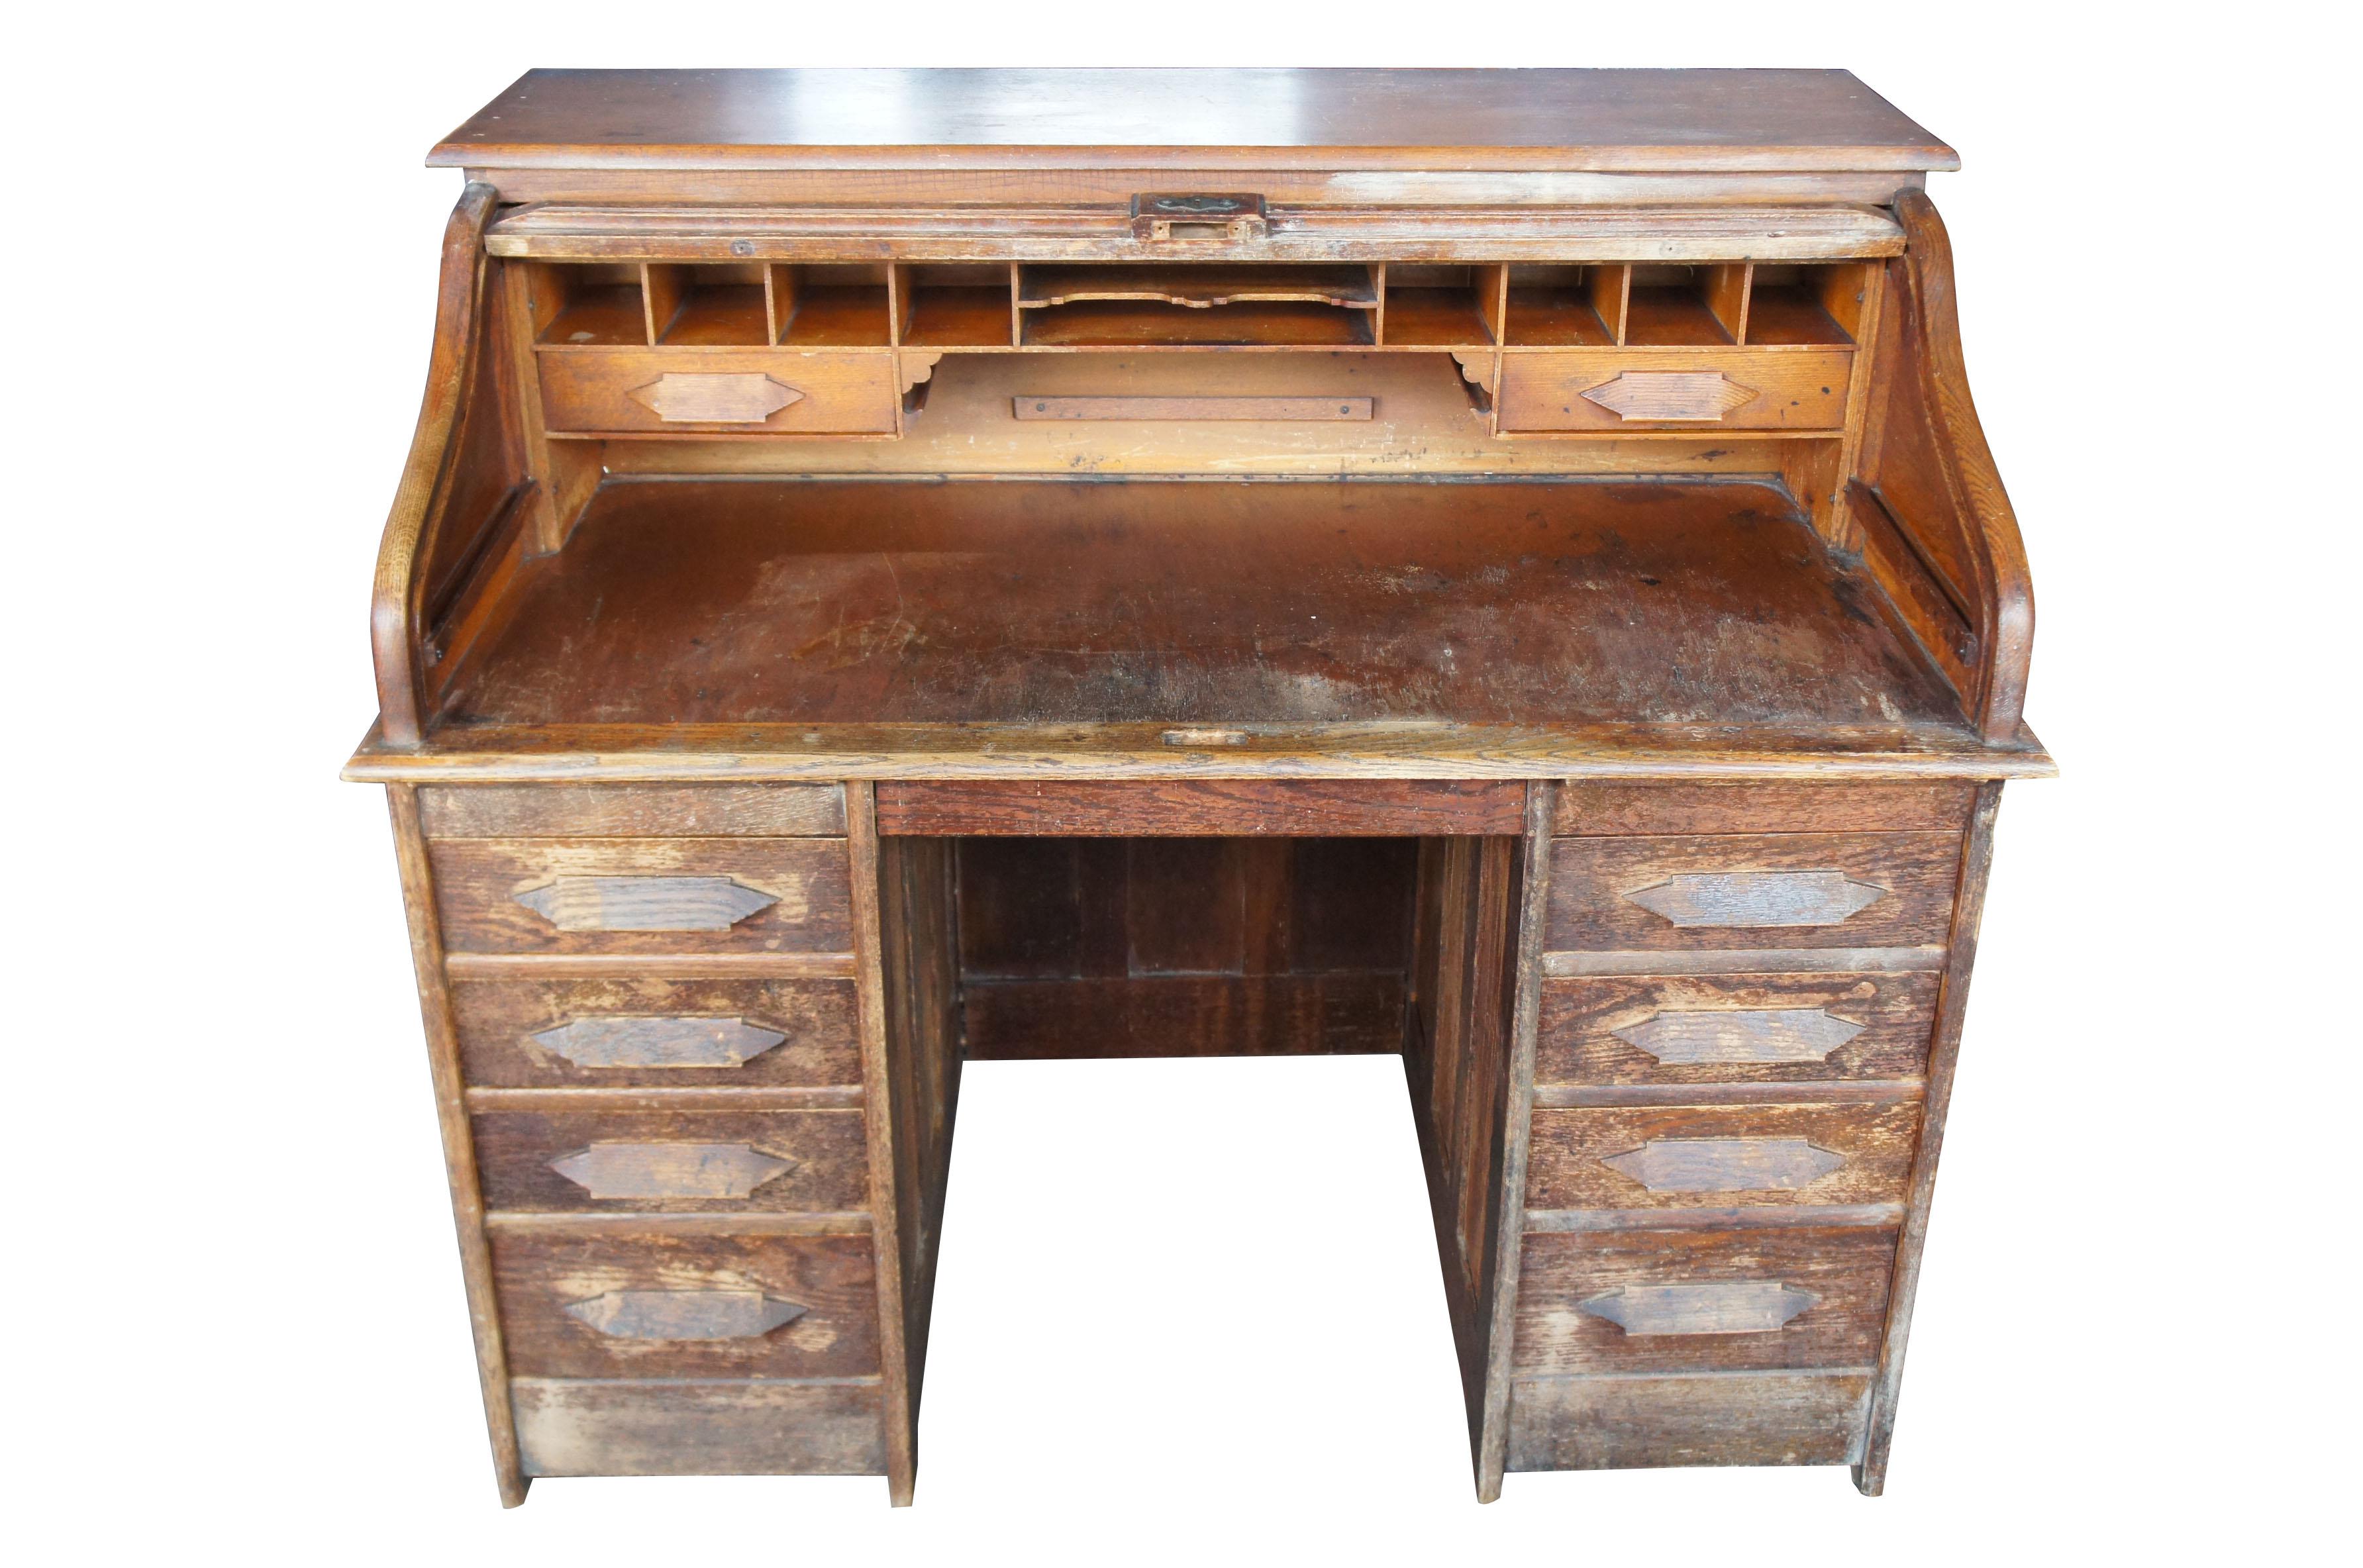 Antique Victorian S-curve solid oak roll top desk tambour door side drawers

Late 19th century Victorian desk. A beautifully designed S-curve roll top with tambour door. Opens to several pigeon holes and drawers. Lower portion has four drawers